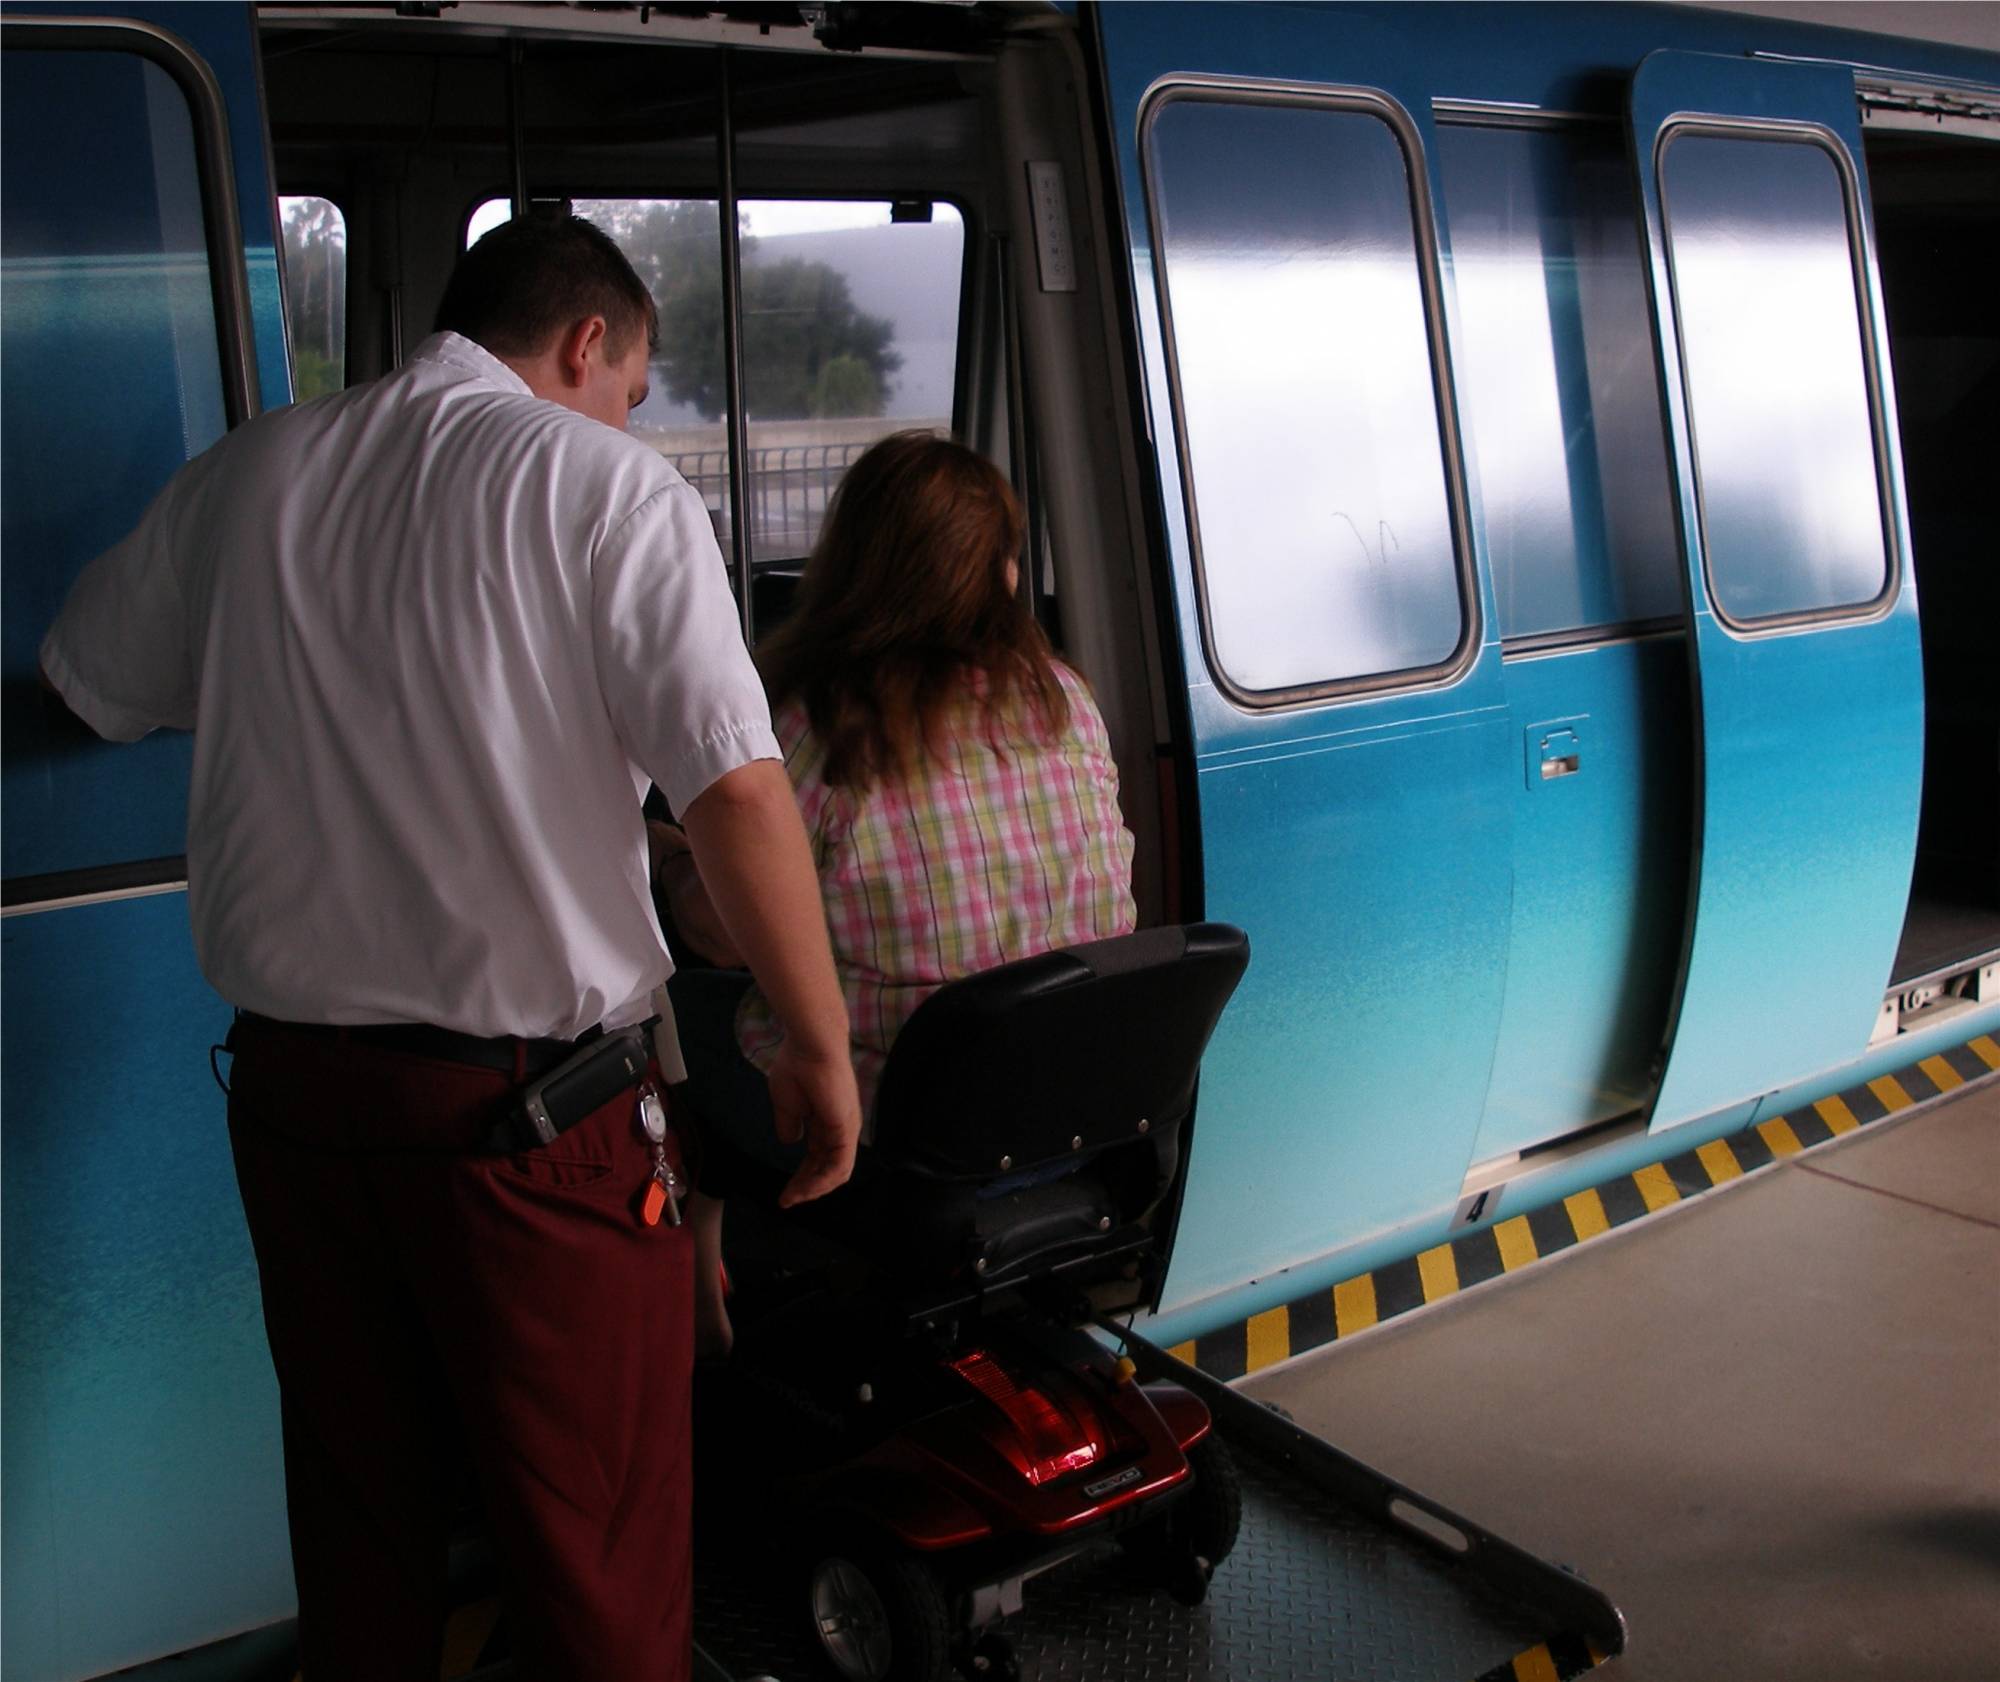 Getting on the Monorail